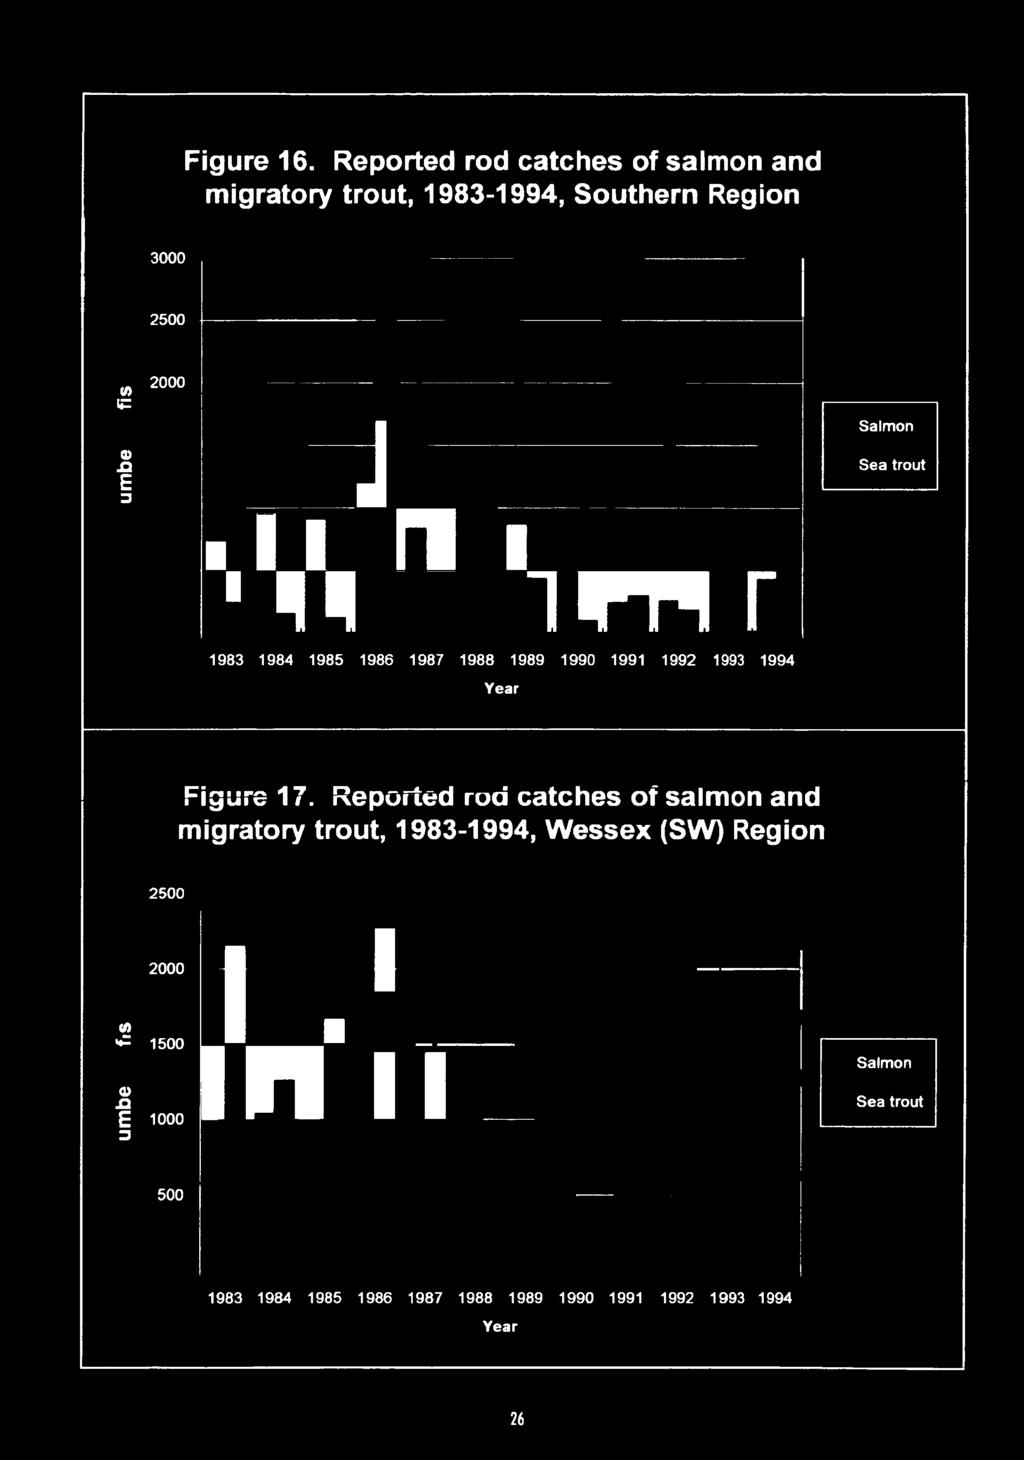 Reported rod catches of salmon and migratory trout, 1983-1994, Wessex (SW)